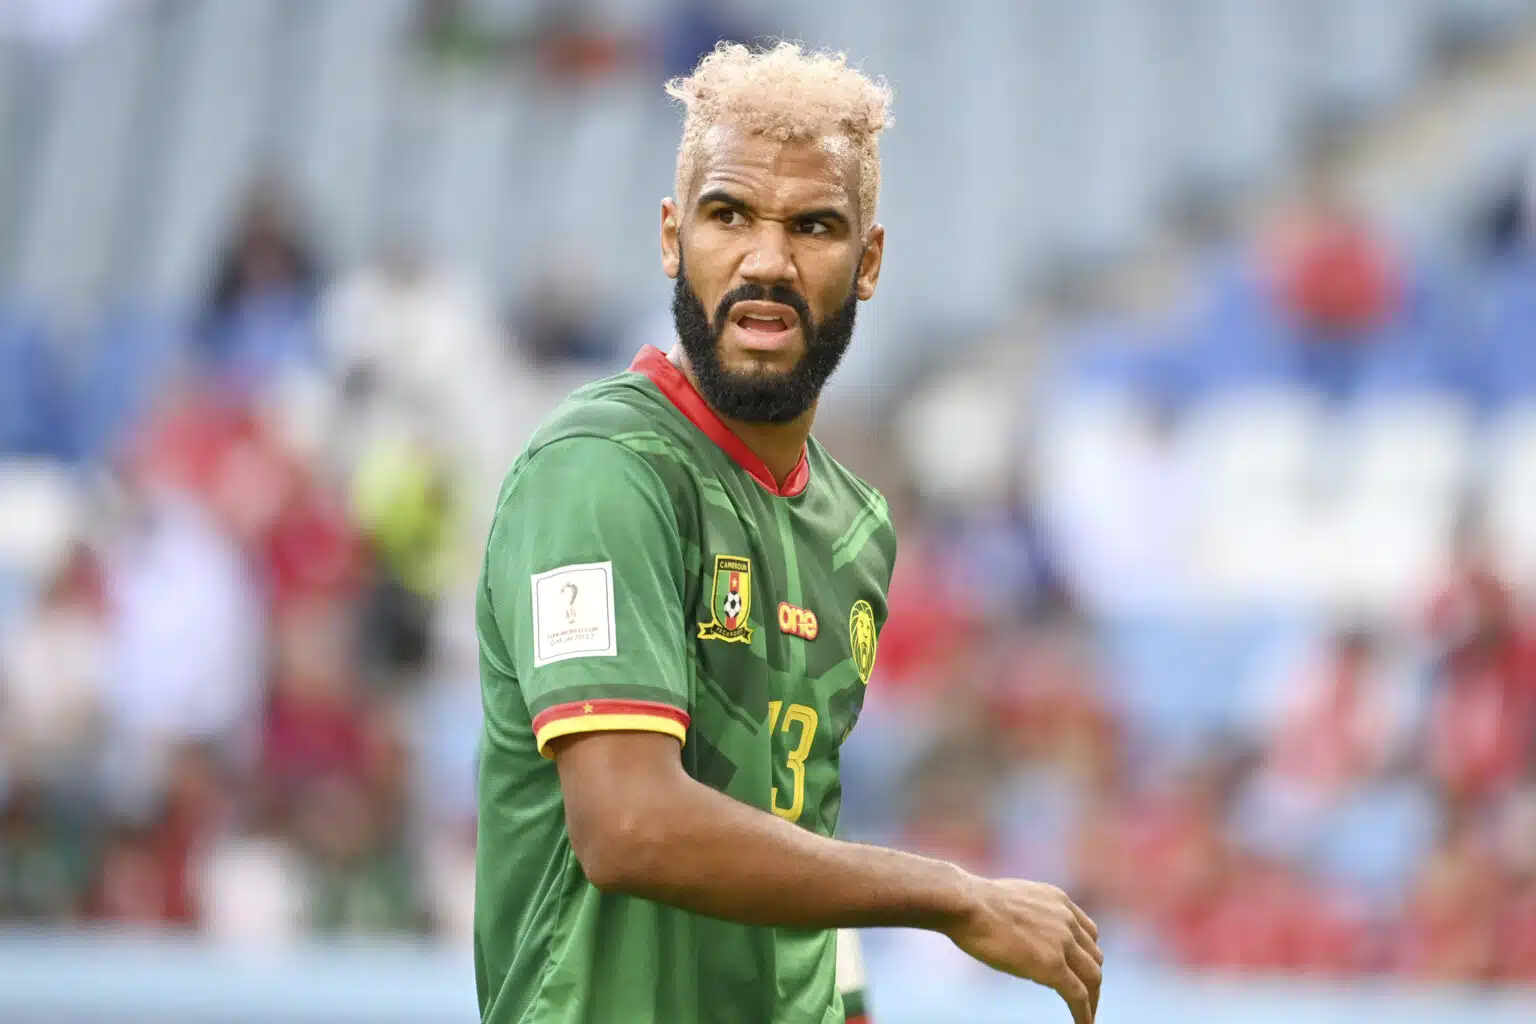 Cameroon football: Choupo-Moting's exclusion looms large as AFCON squad announcement nears